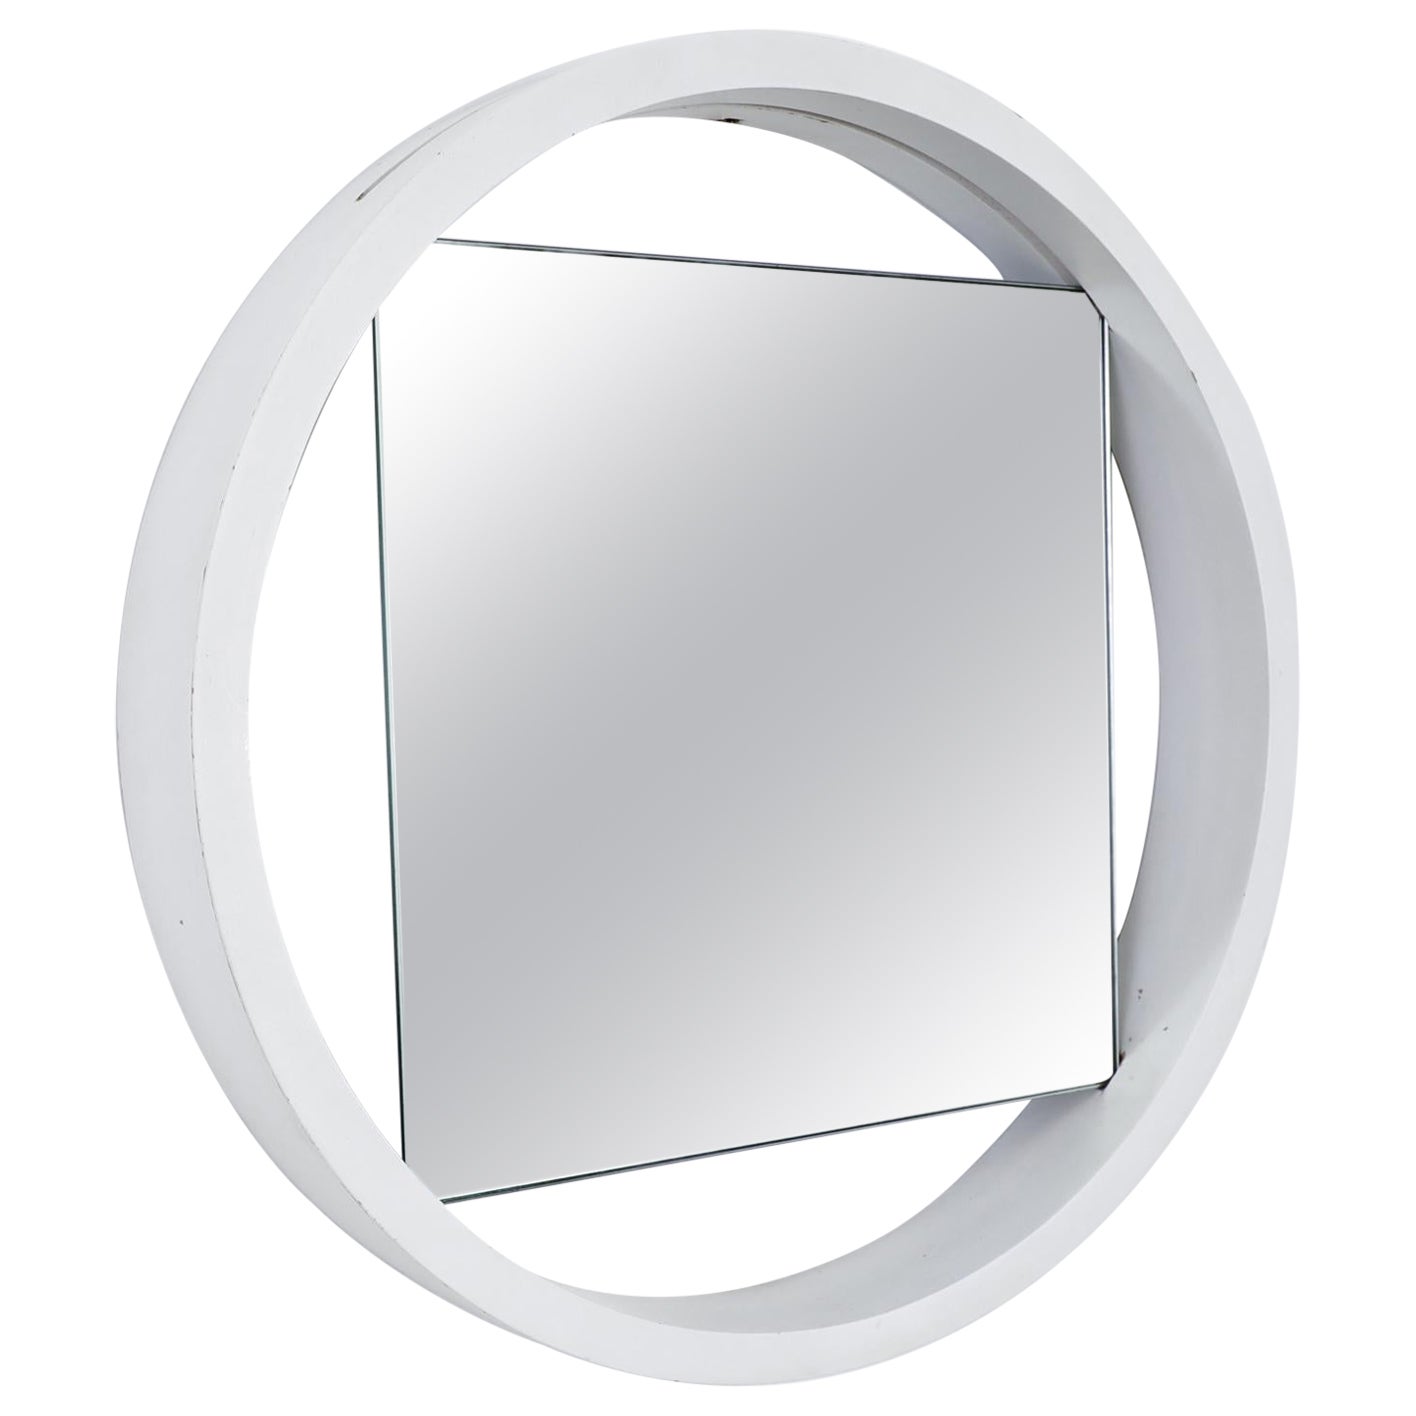 Model DZ84  White Lacquer Framed Mirror by Benno Premsela for 't Spectrum, 1950s